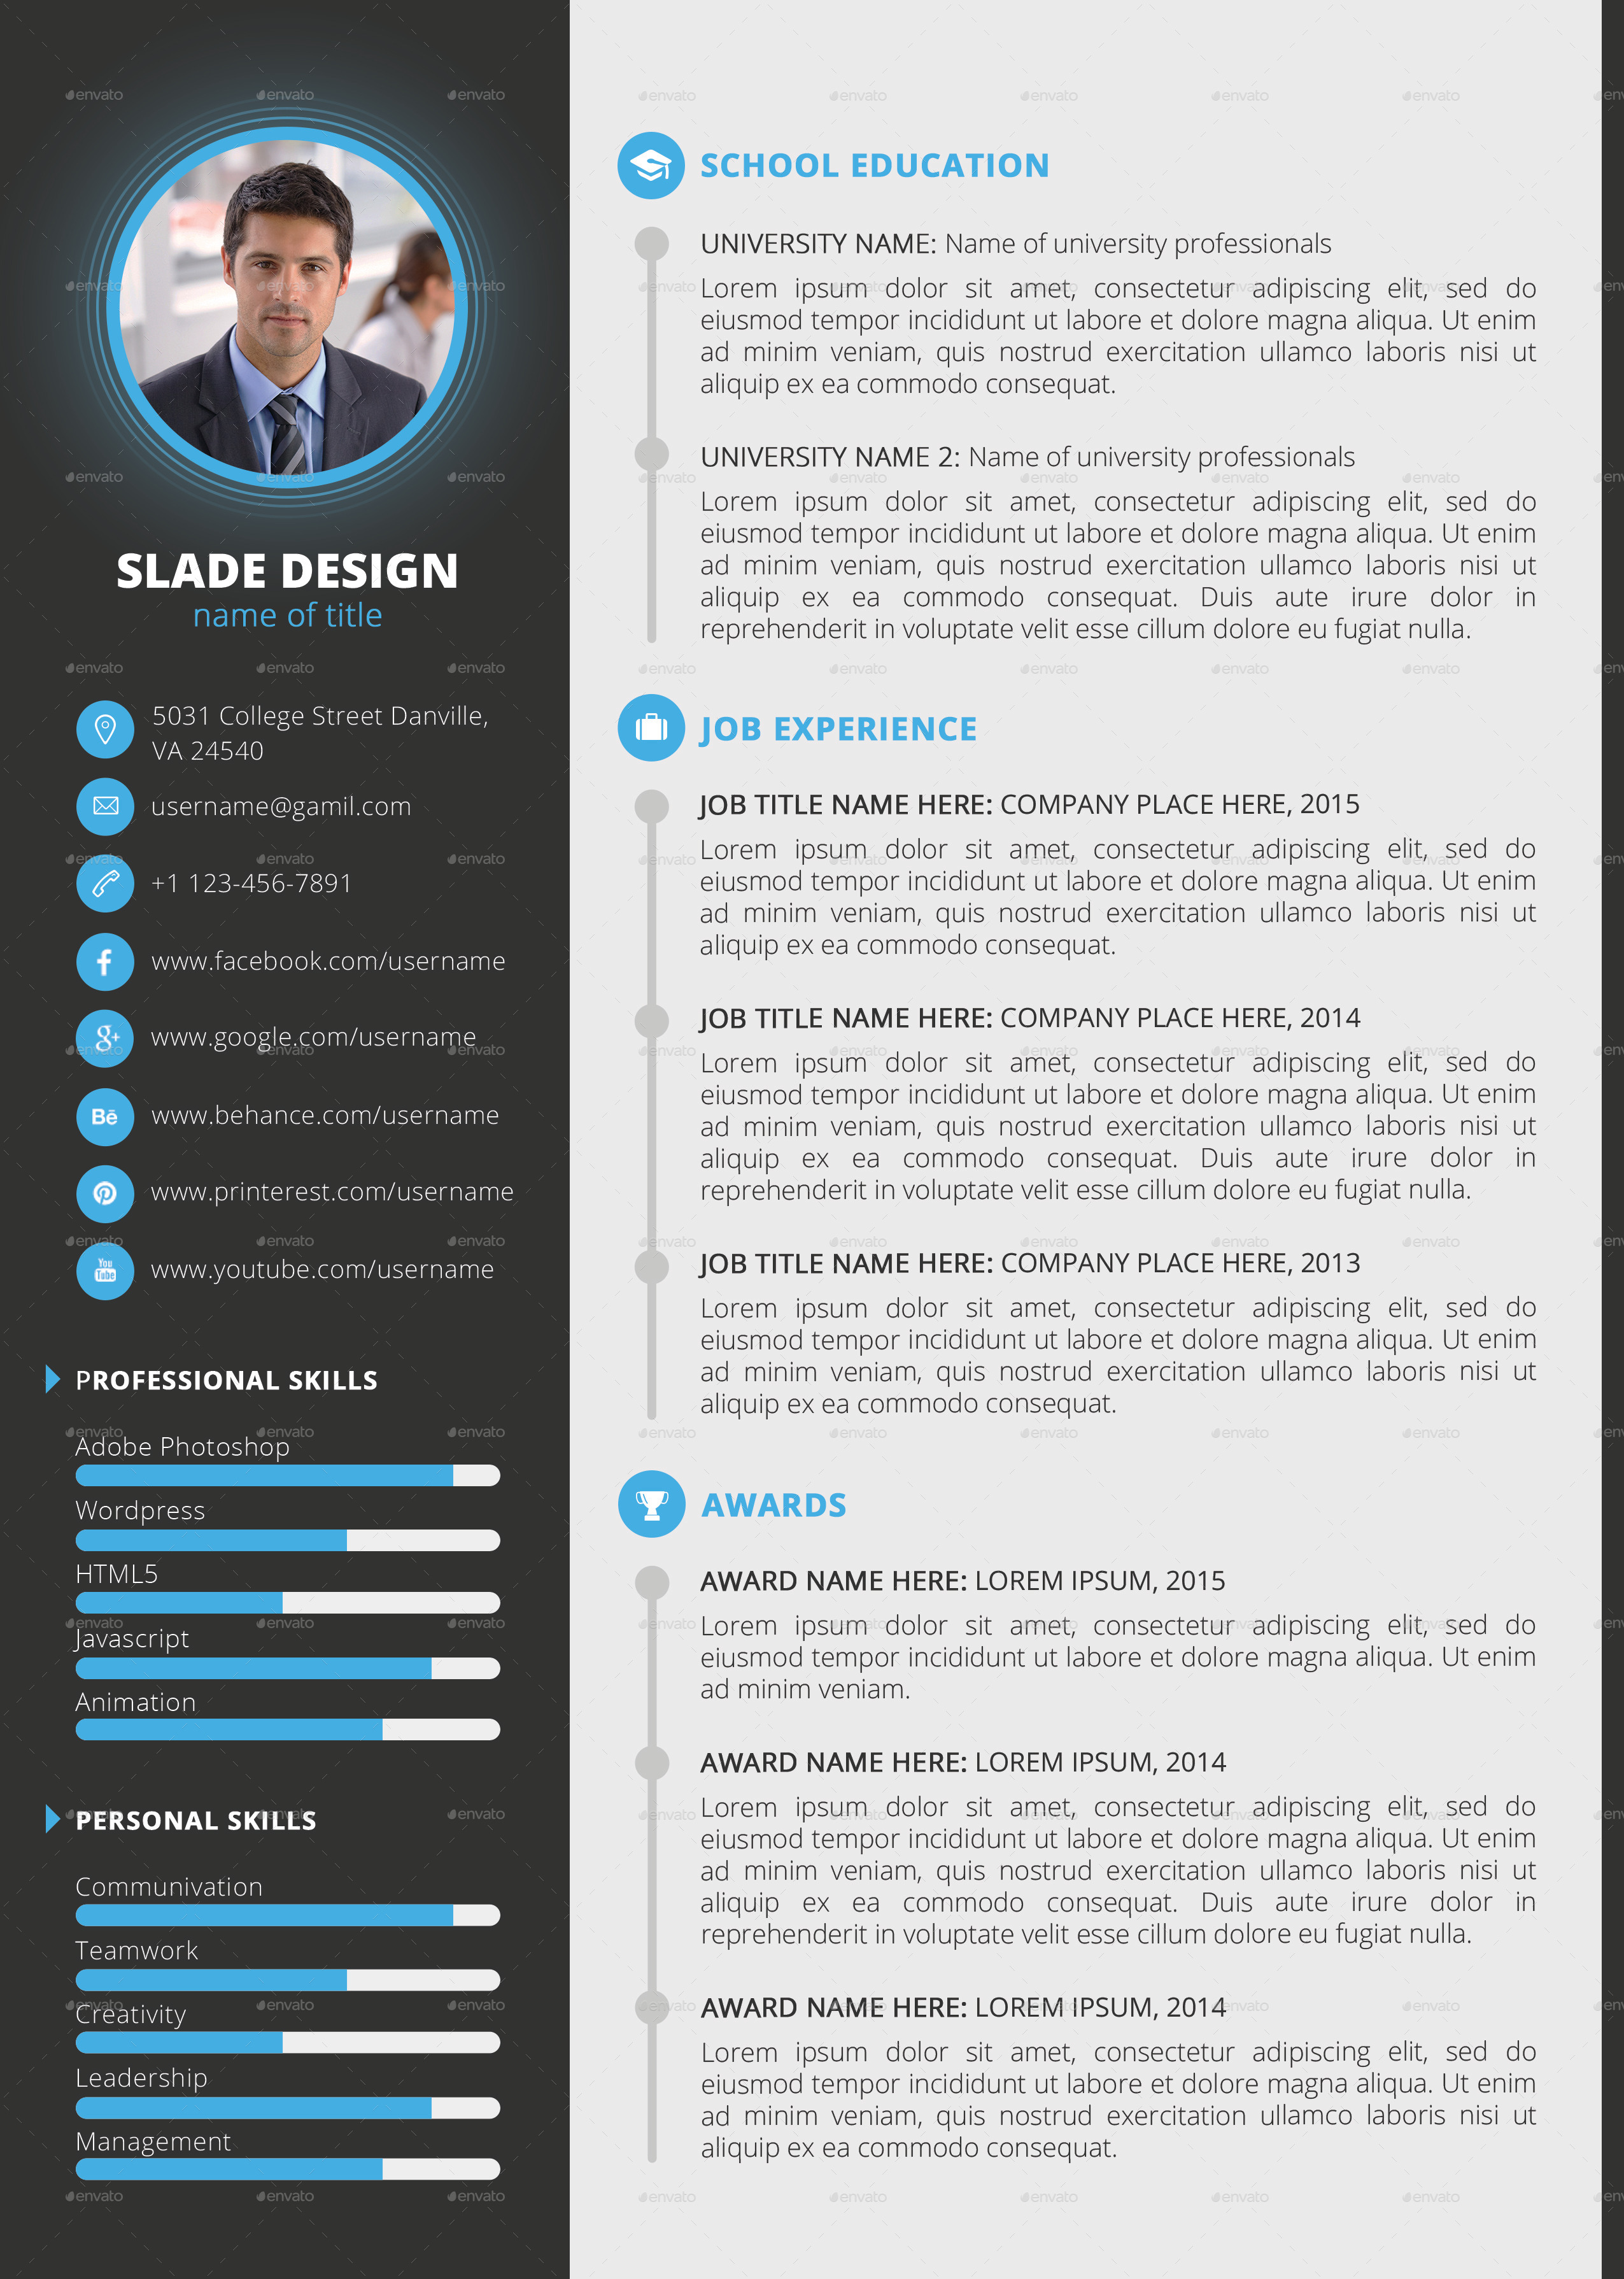 slade professional quality cv    resume template by sladedesign